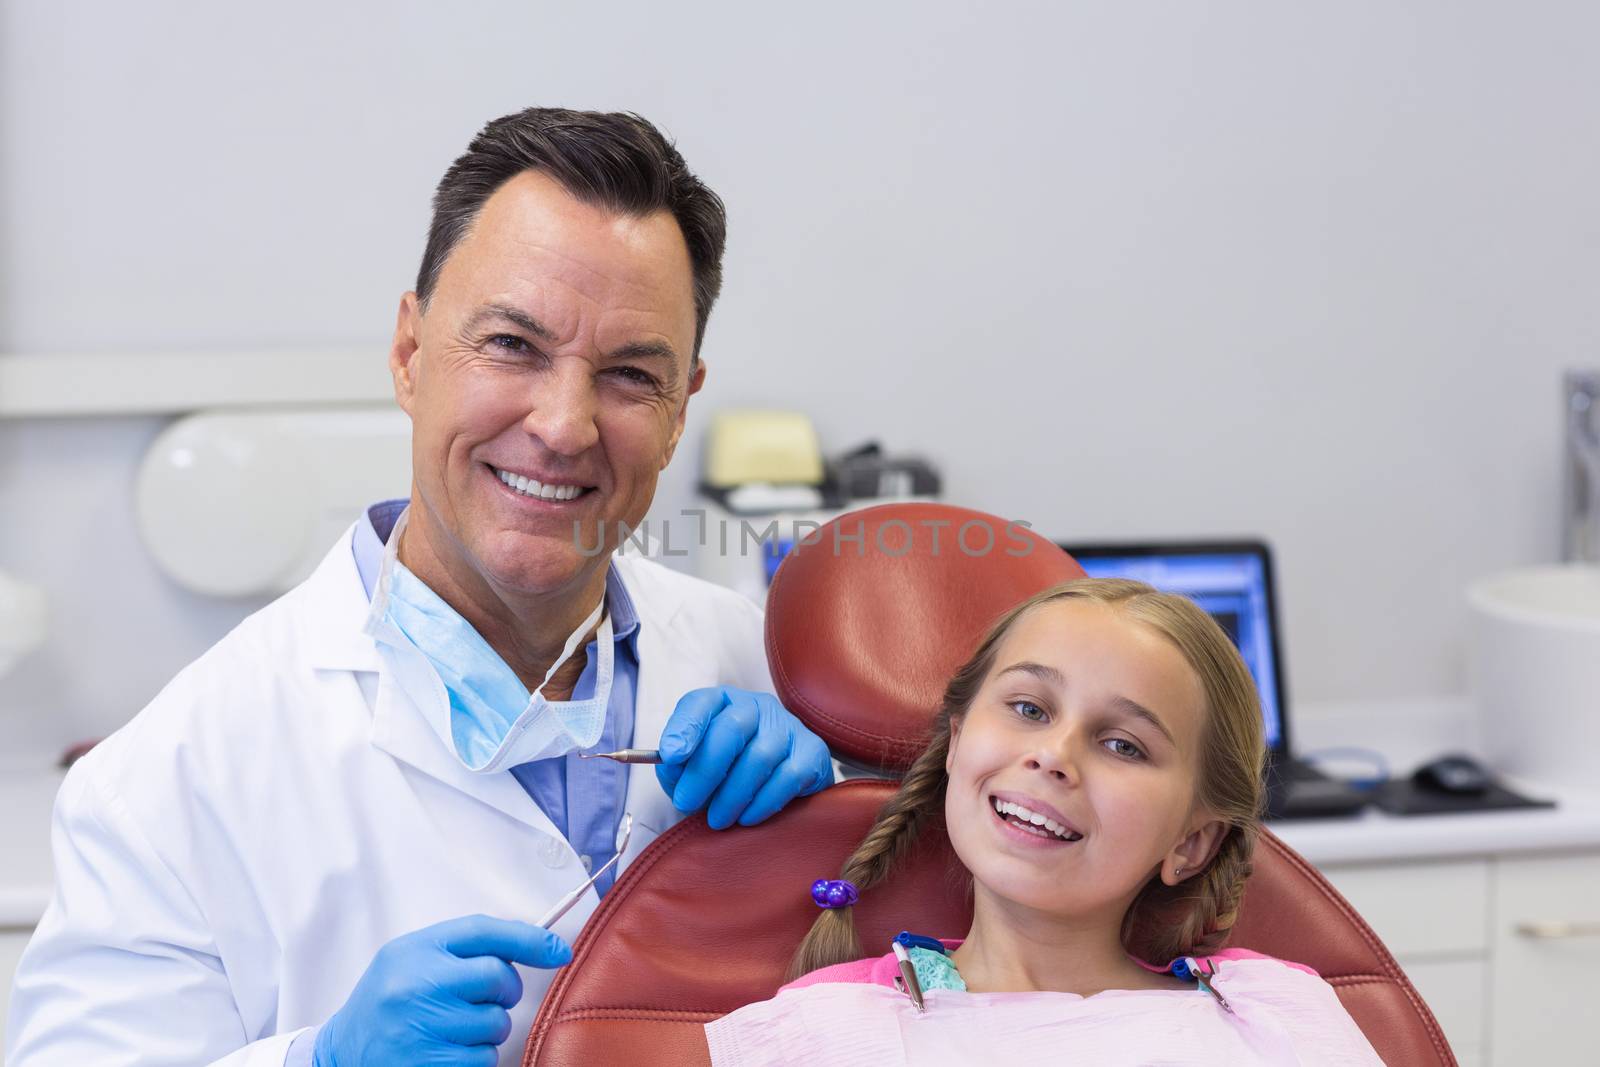 Portrait of dentist interacting with young patient at dental clinic